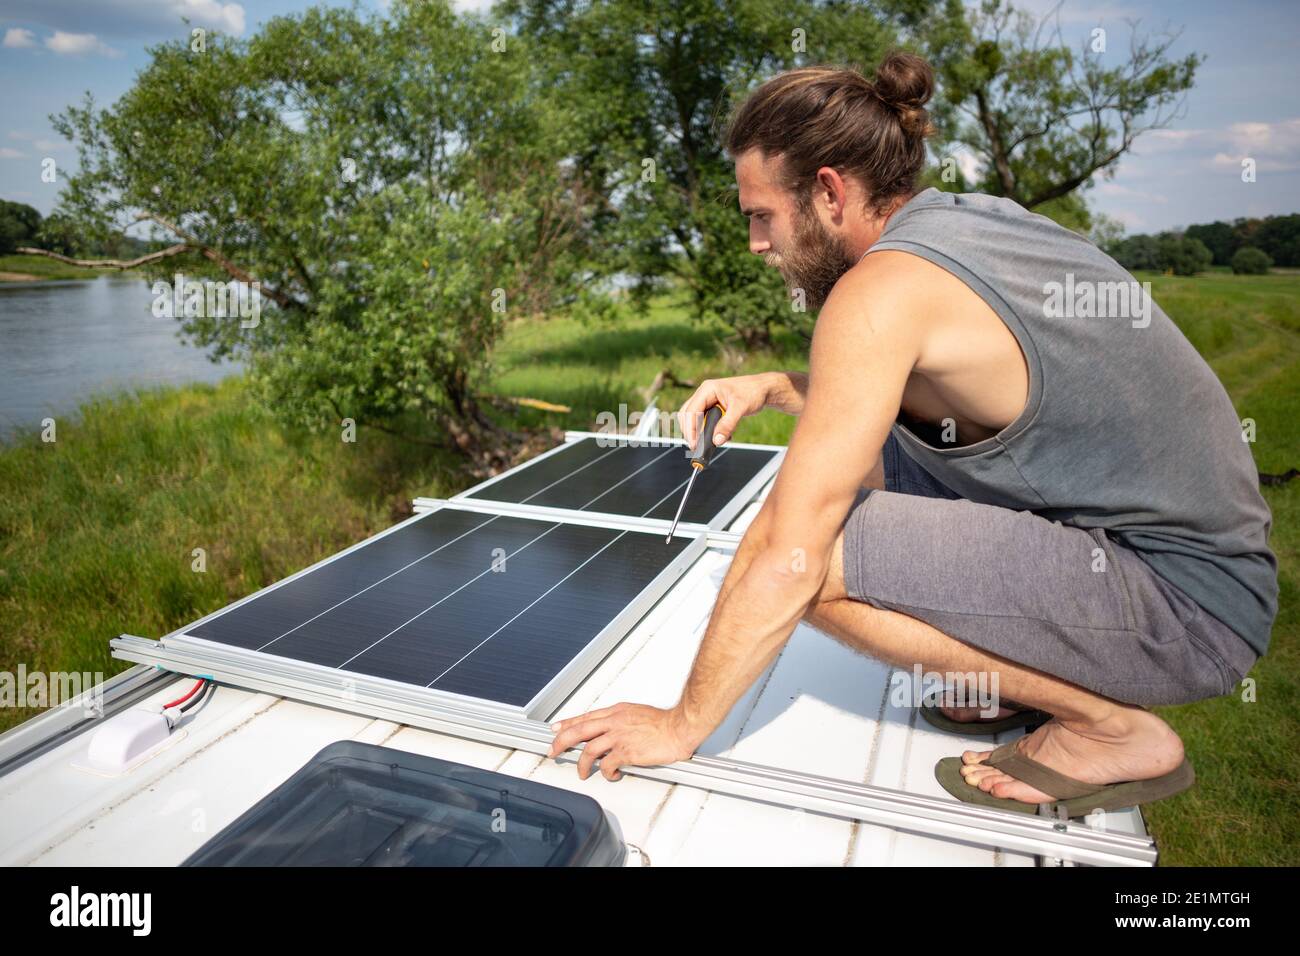 Man on top of a camper van next to solar panels Stock Photo